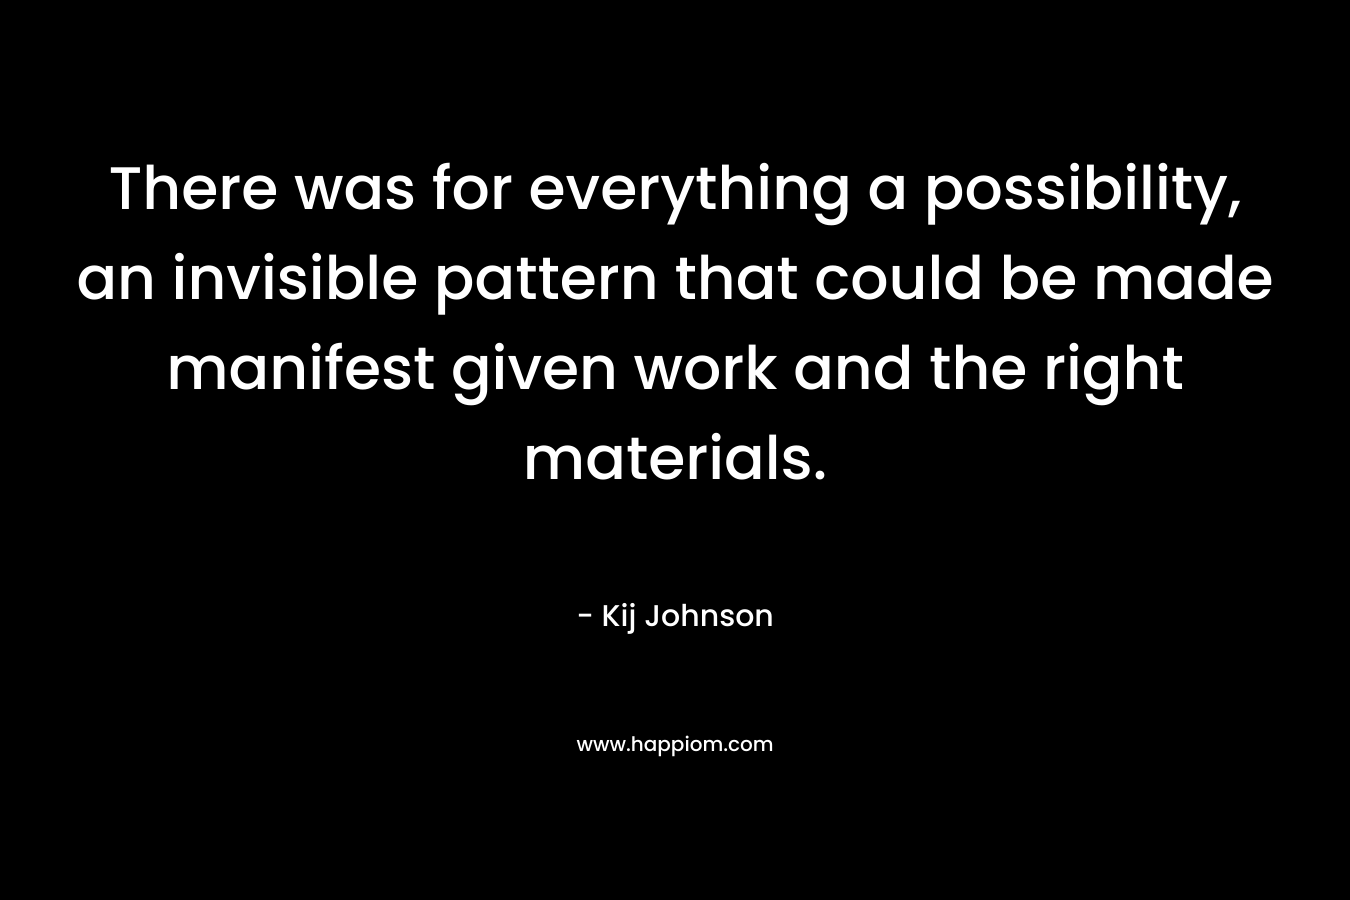 There was for everything a possibility, an invisible pattern that could be made manifest given work and the right materials.